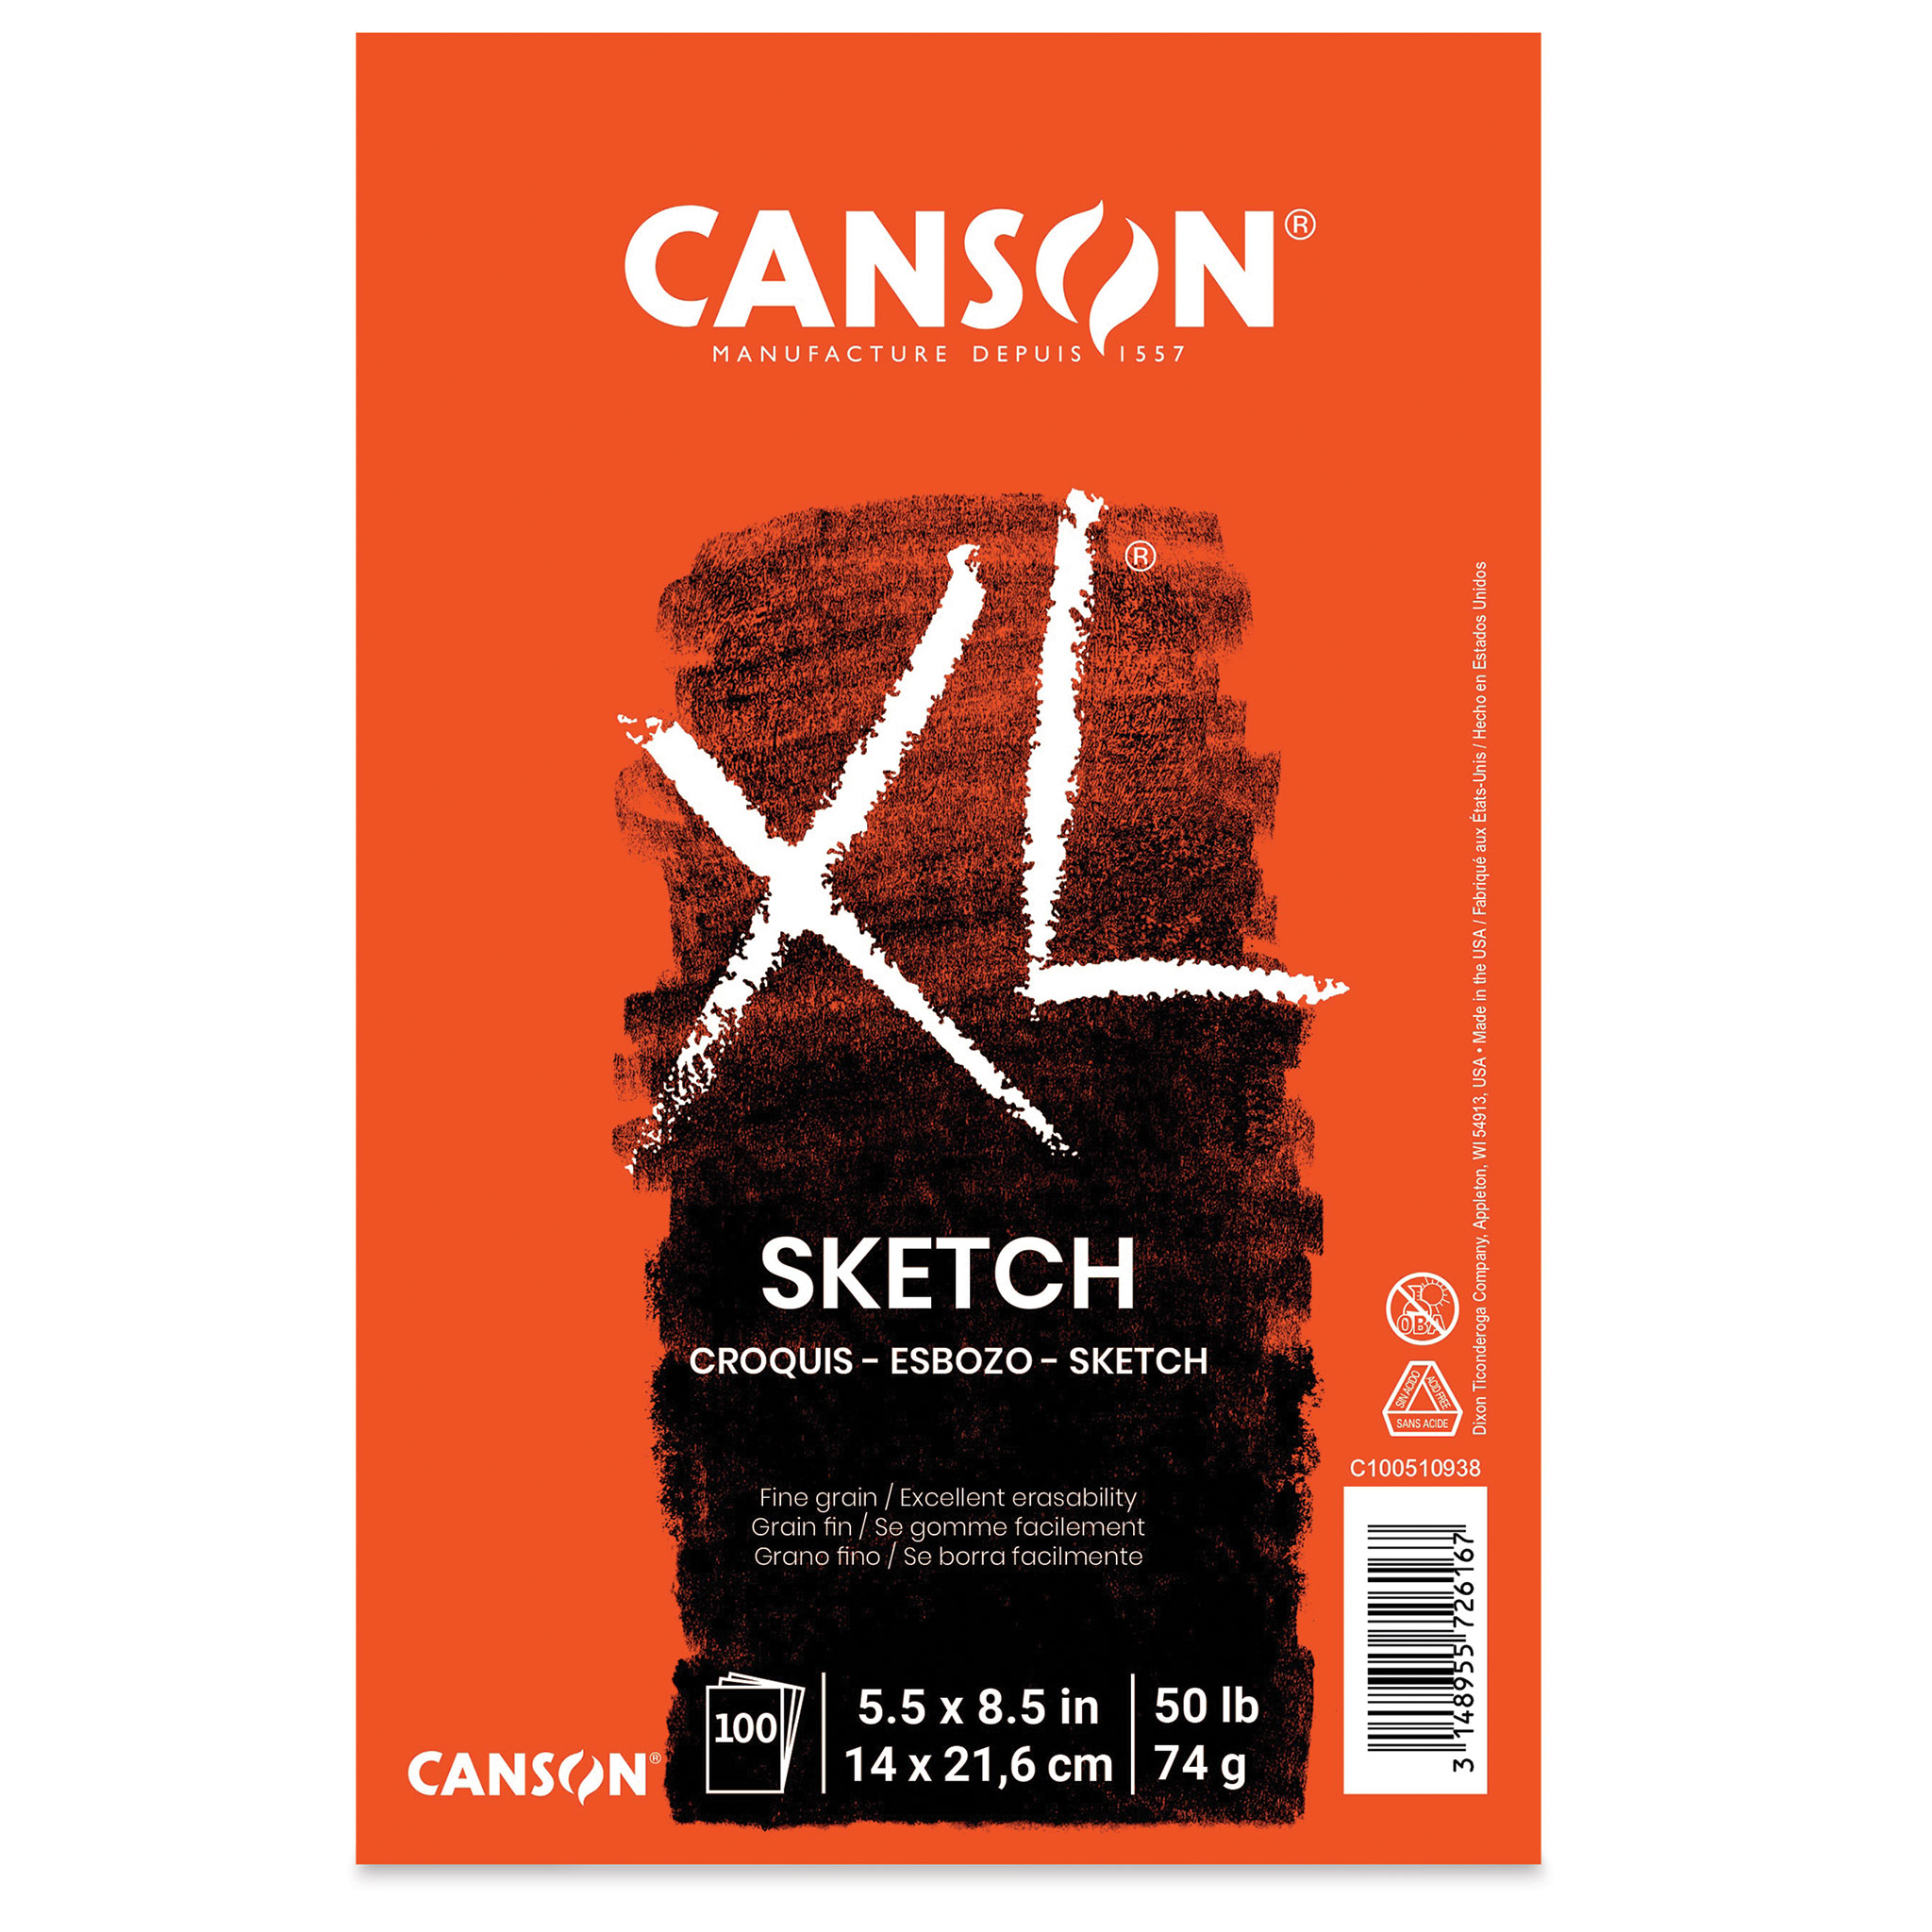 Canson Pro Layout Marker Pad, 14 x 17, 50 Sheets - The Art  Store/Commercial Art Supply